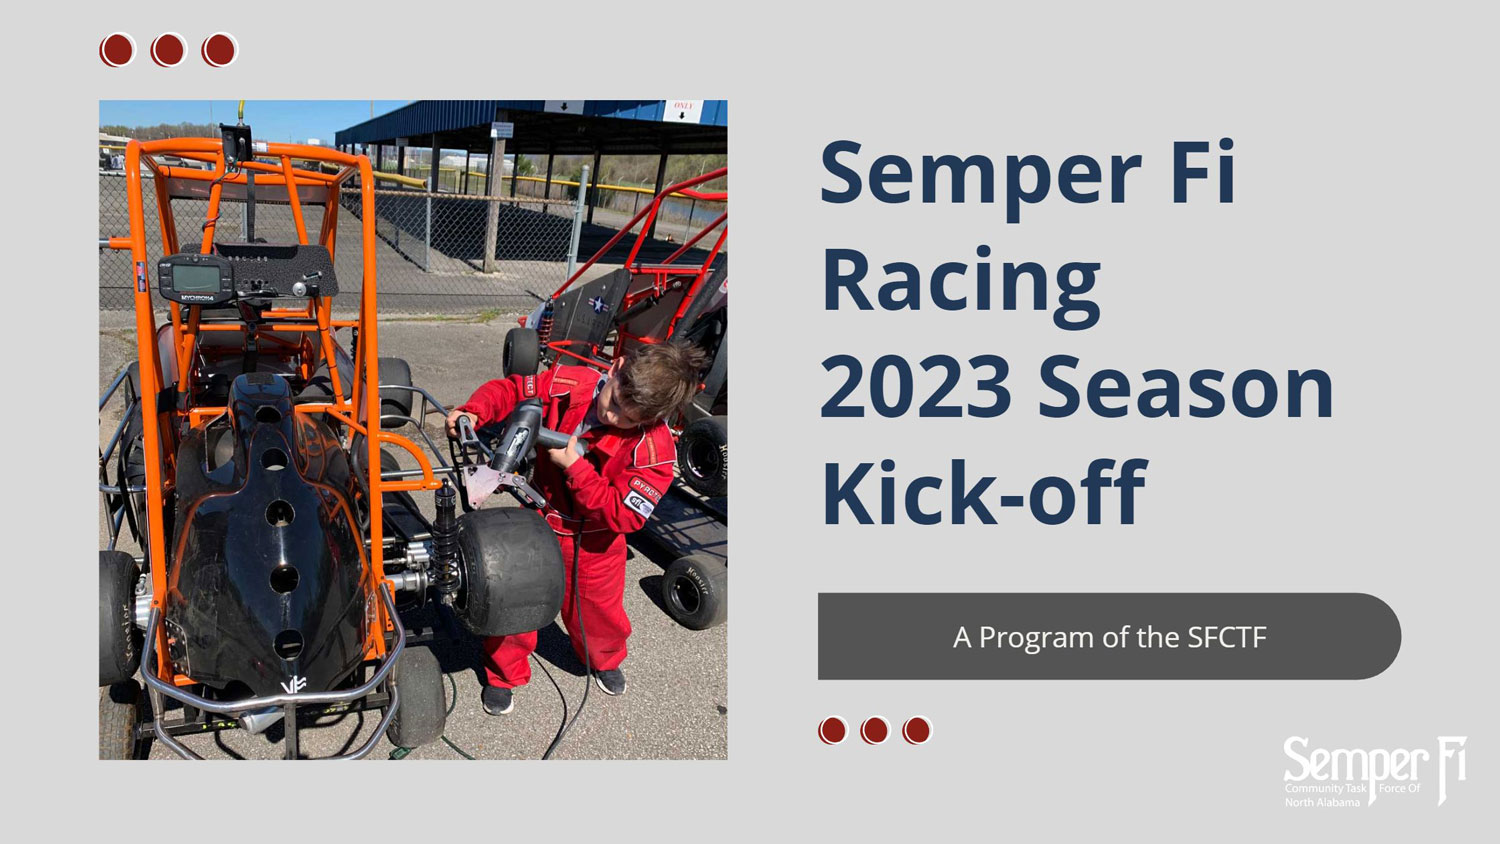 Semper Fi Community Task Force Racing team prepares for a race, a boy works on the tire of a quarter midget race car